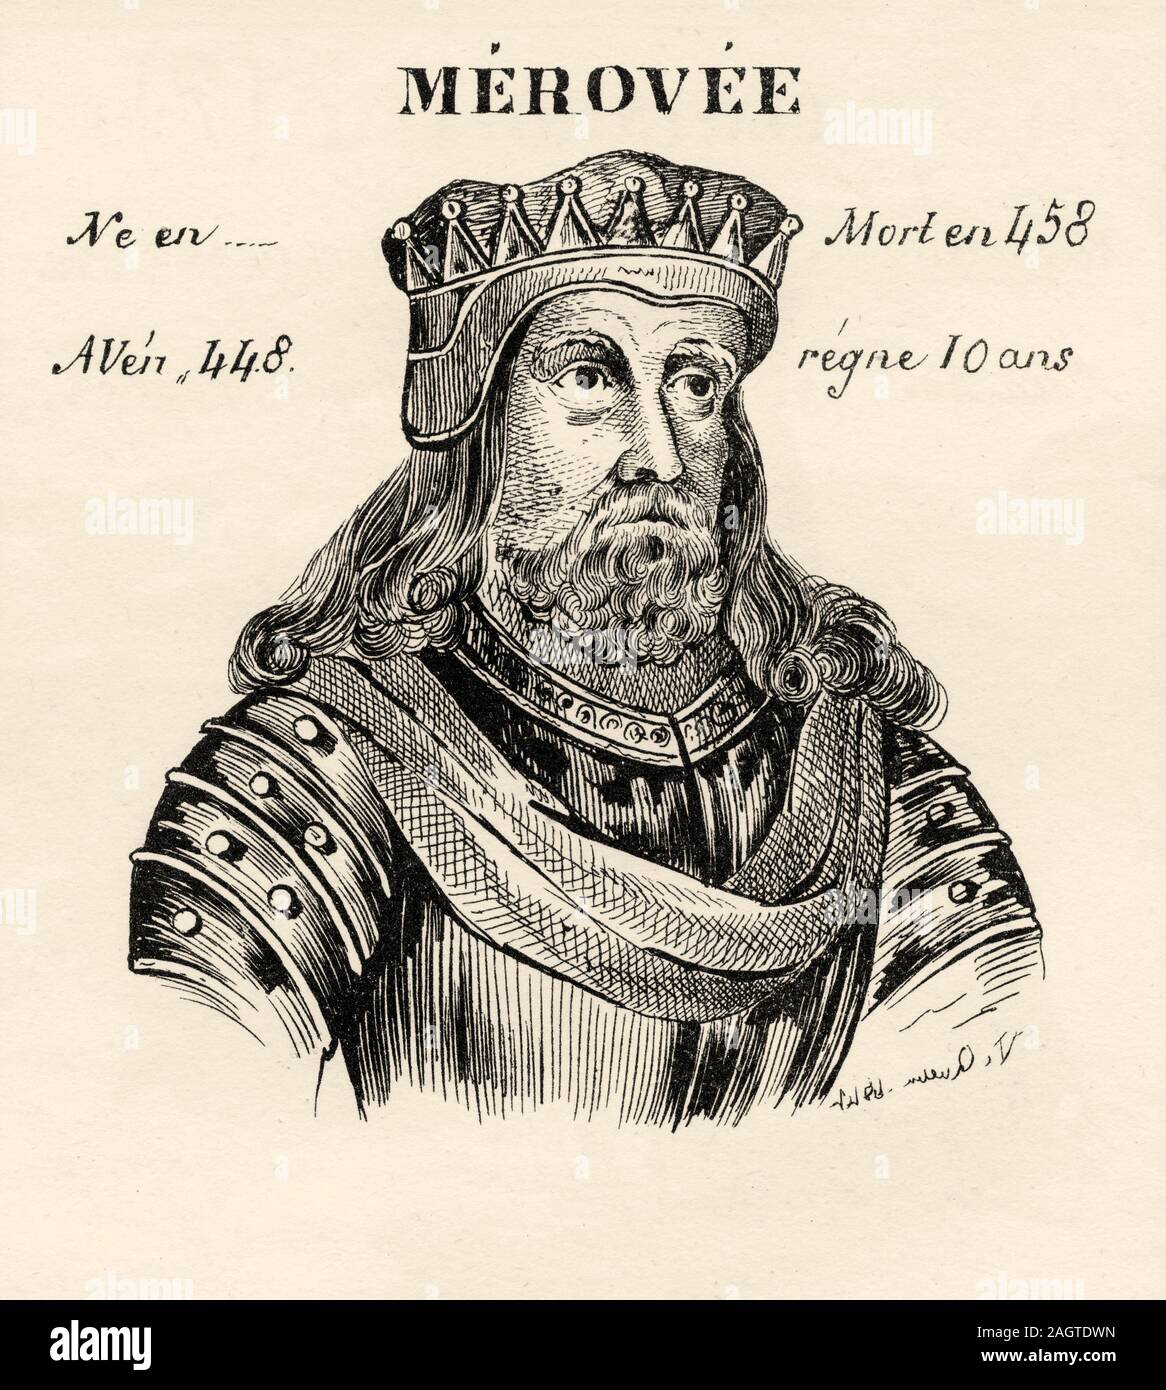 Portrait of Merovech, Meroveus, Merovechus, Merovius or Mérovée (412 - 457). King of France from 448 to 458. Merovingian Dynasty. History of France, f Stock Photo